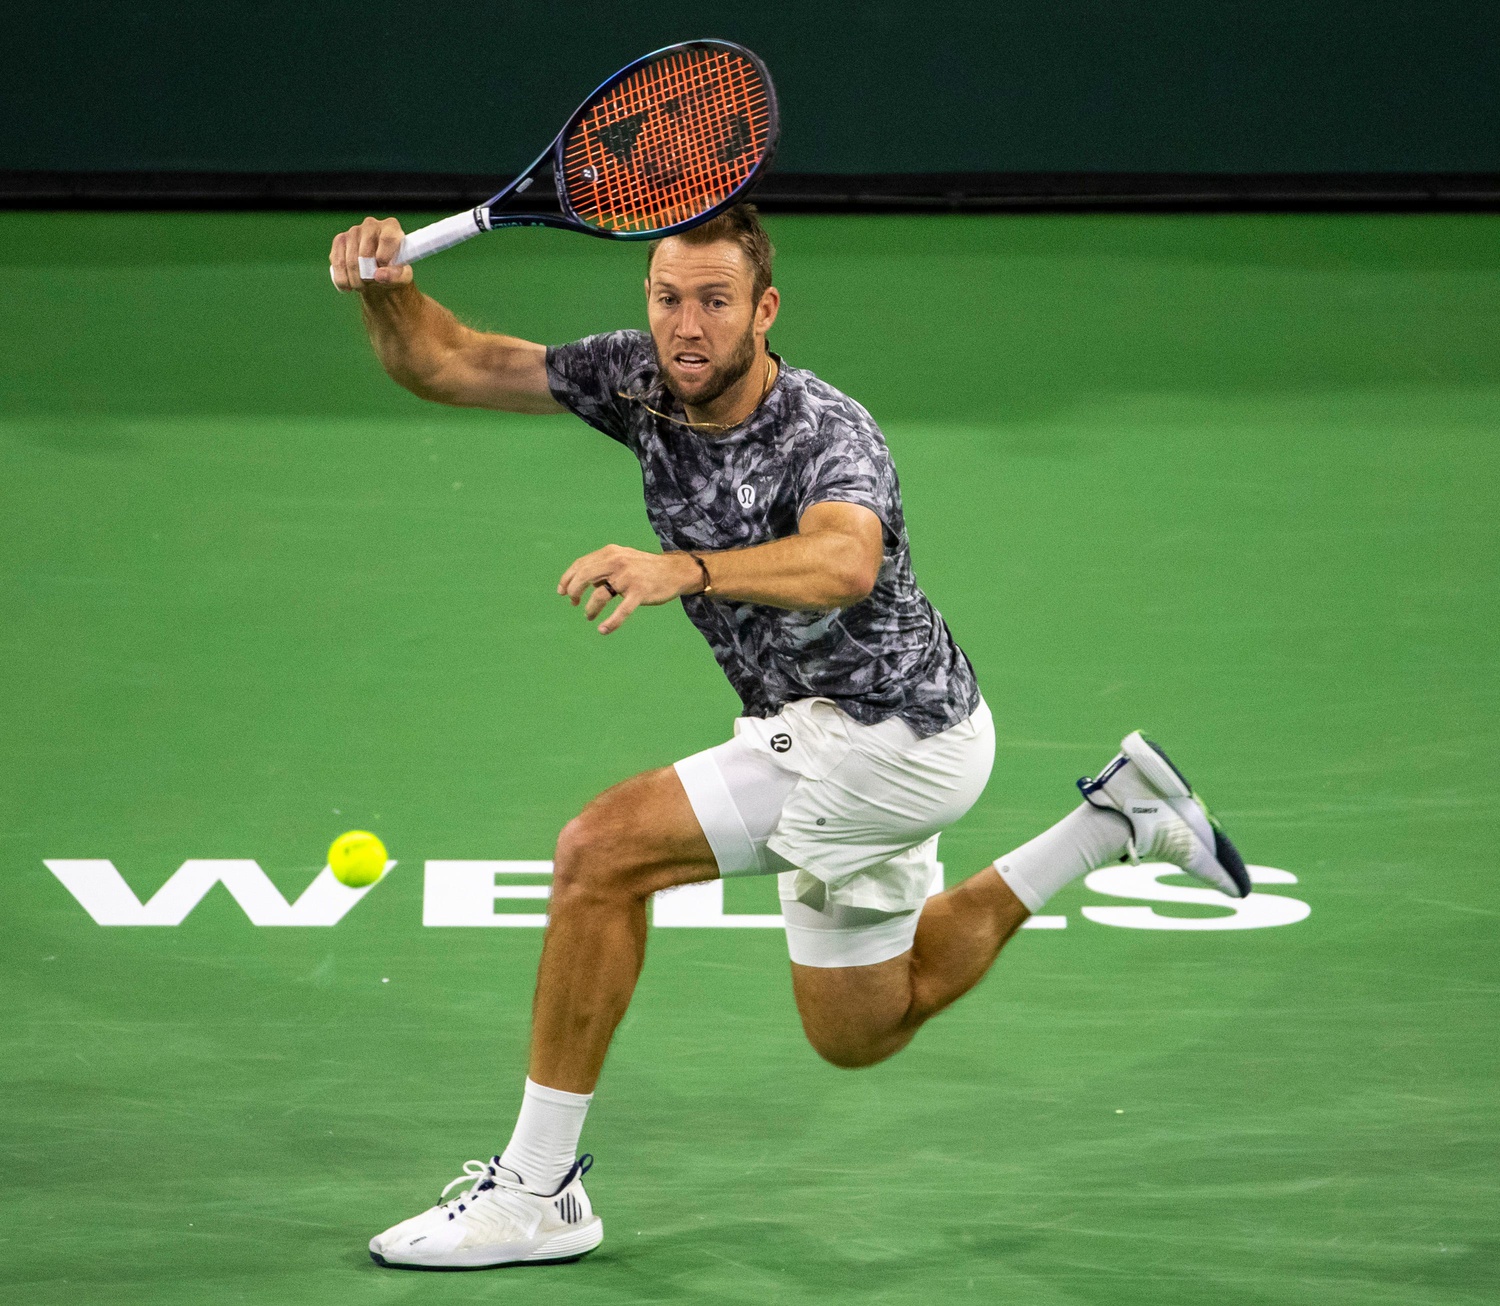 Jack Sock is retiring from tennis after the U.S. Open to join the PPA.